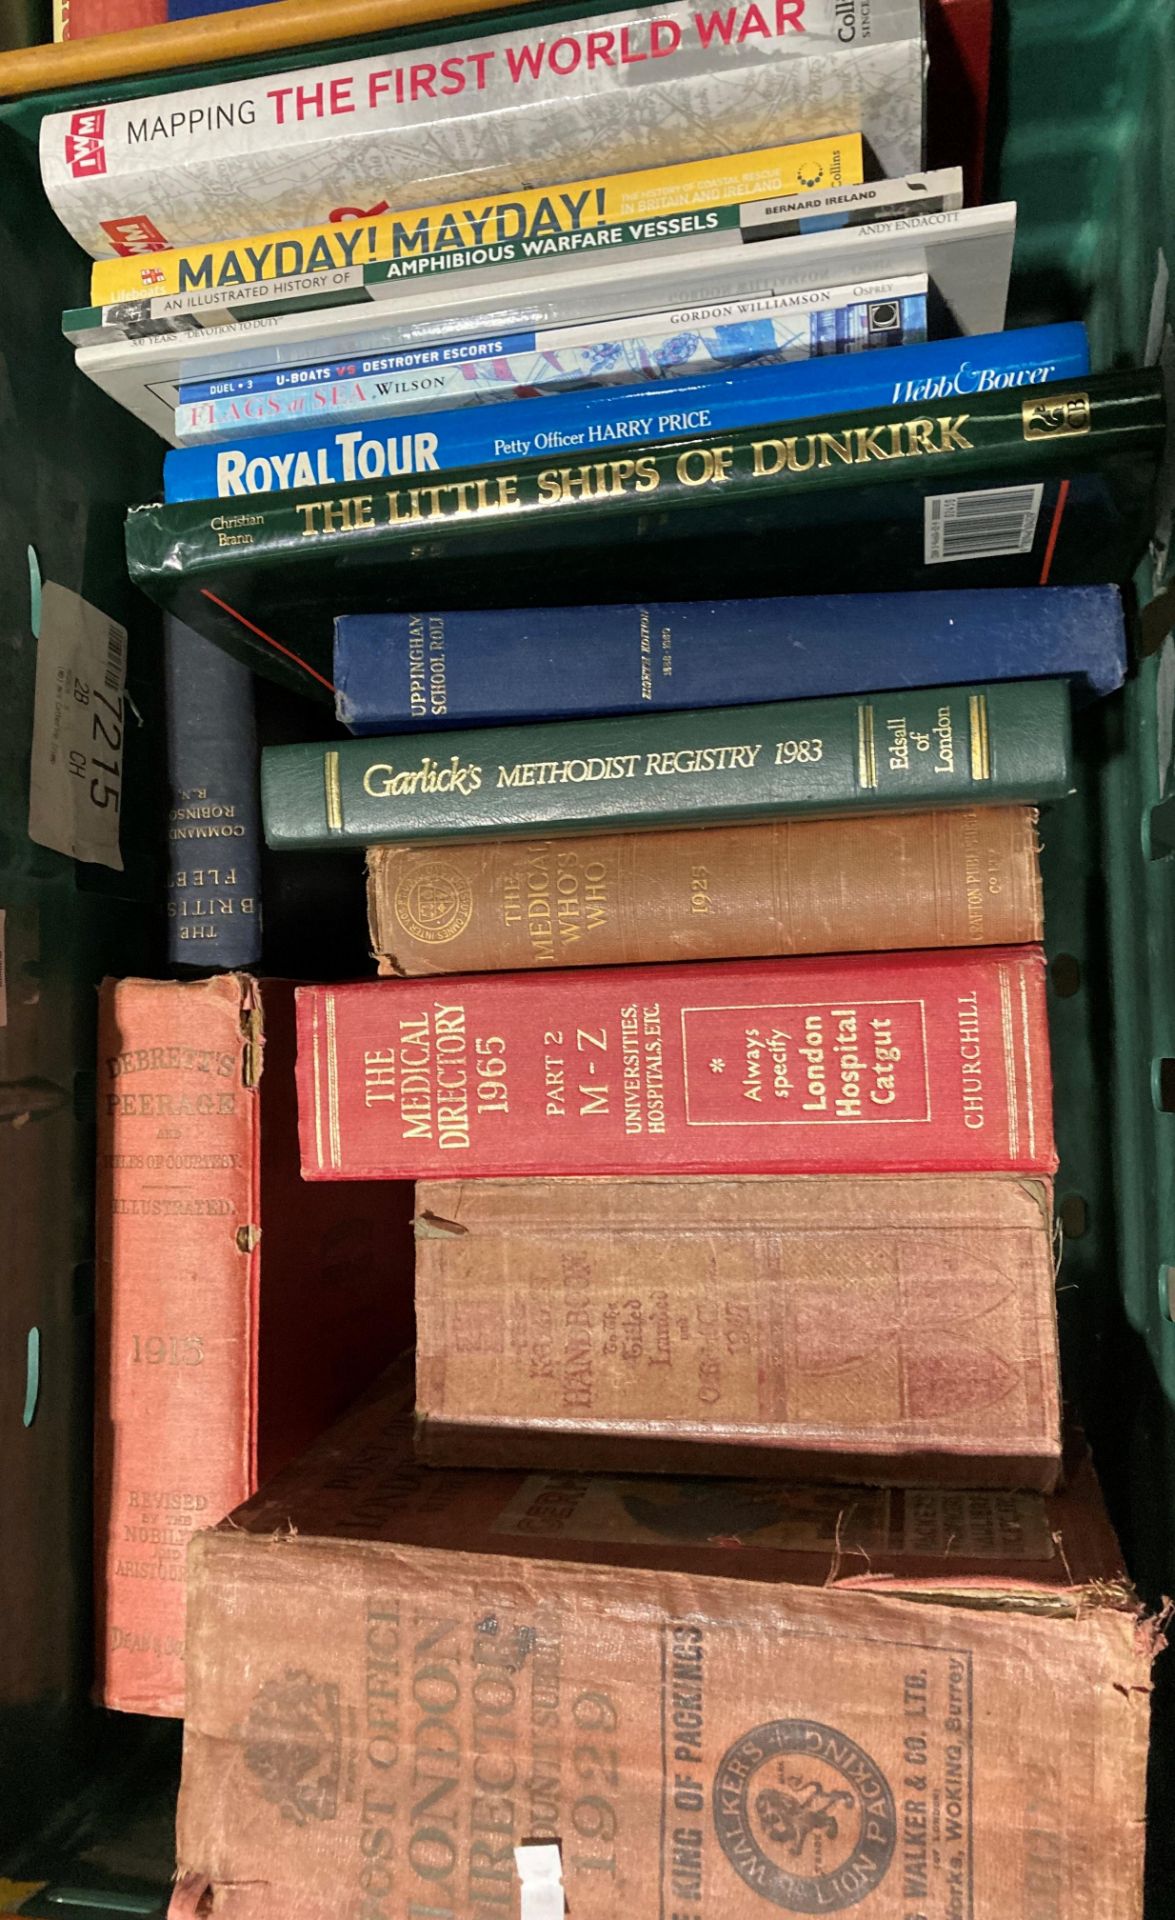 Contents to two crate - forty books - directories, warfare, naval history, etc. - Image 2 of 3